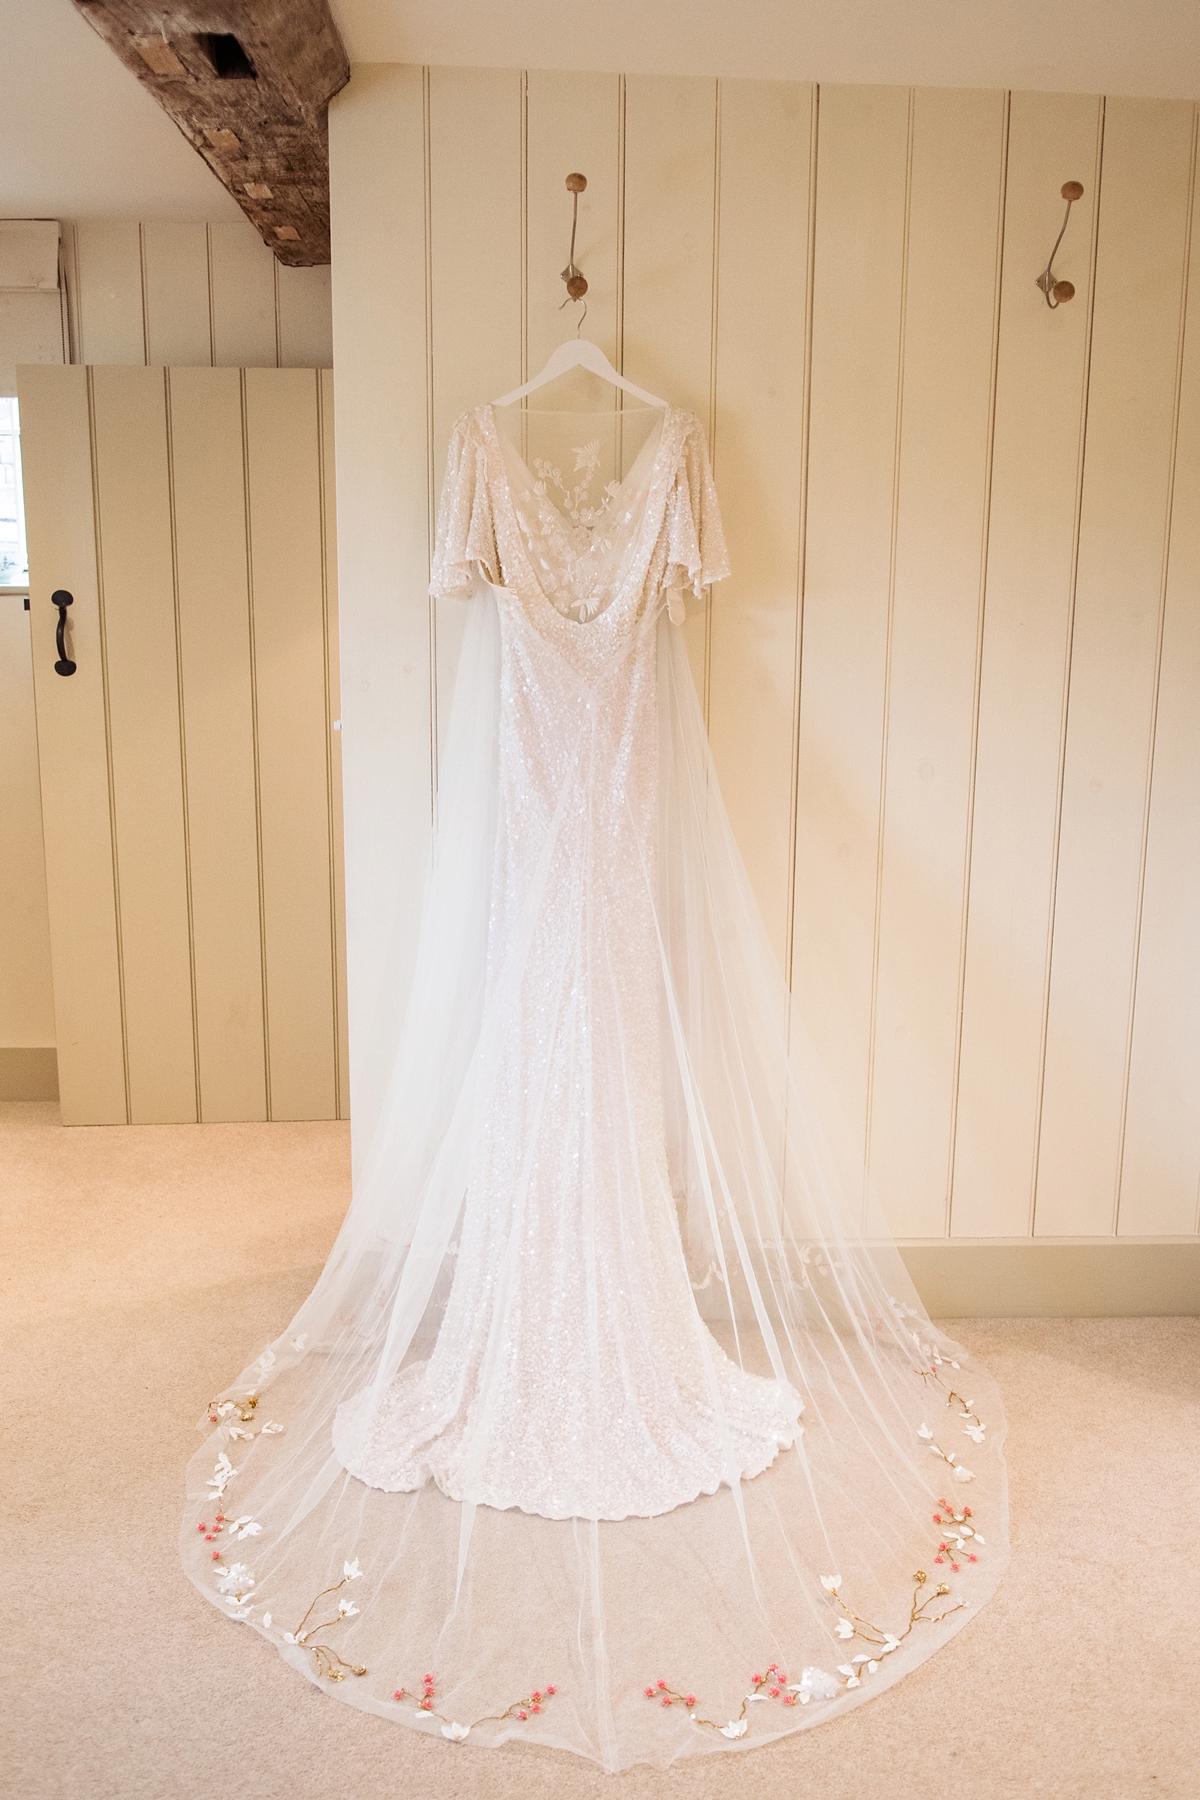 8 A Karen Willis Holmes sequin dress for a colourful Lost Gardens of Heligan inspired barn wedding